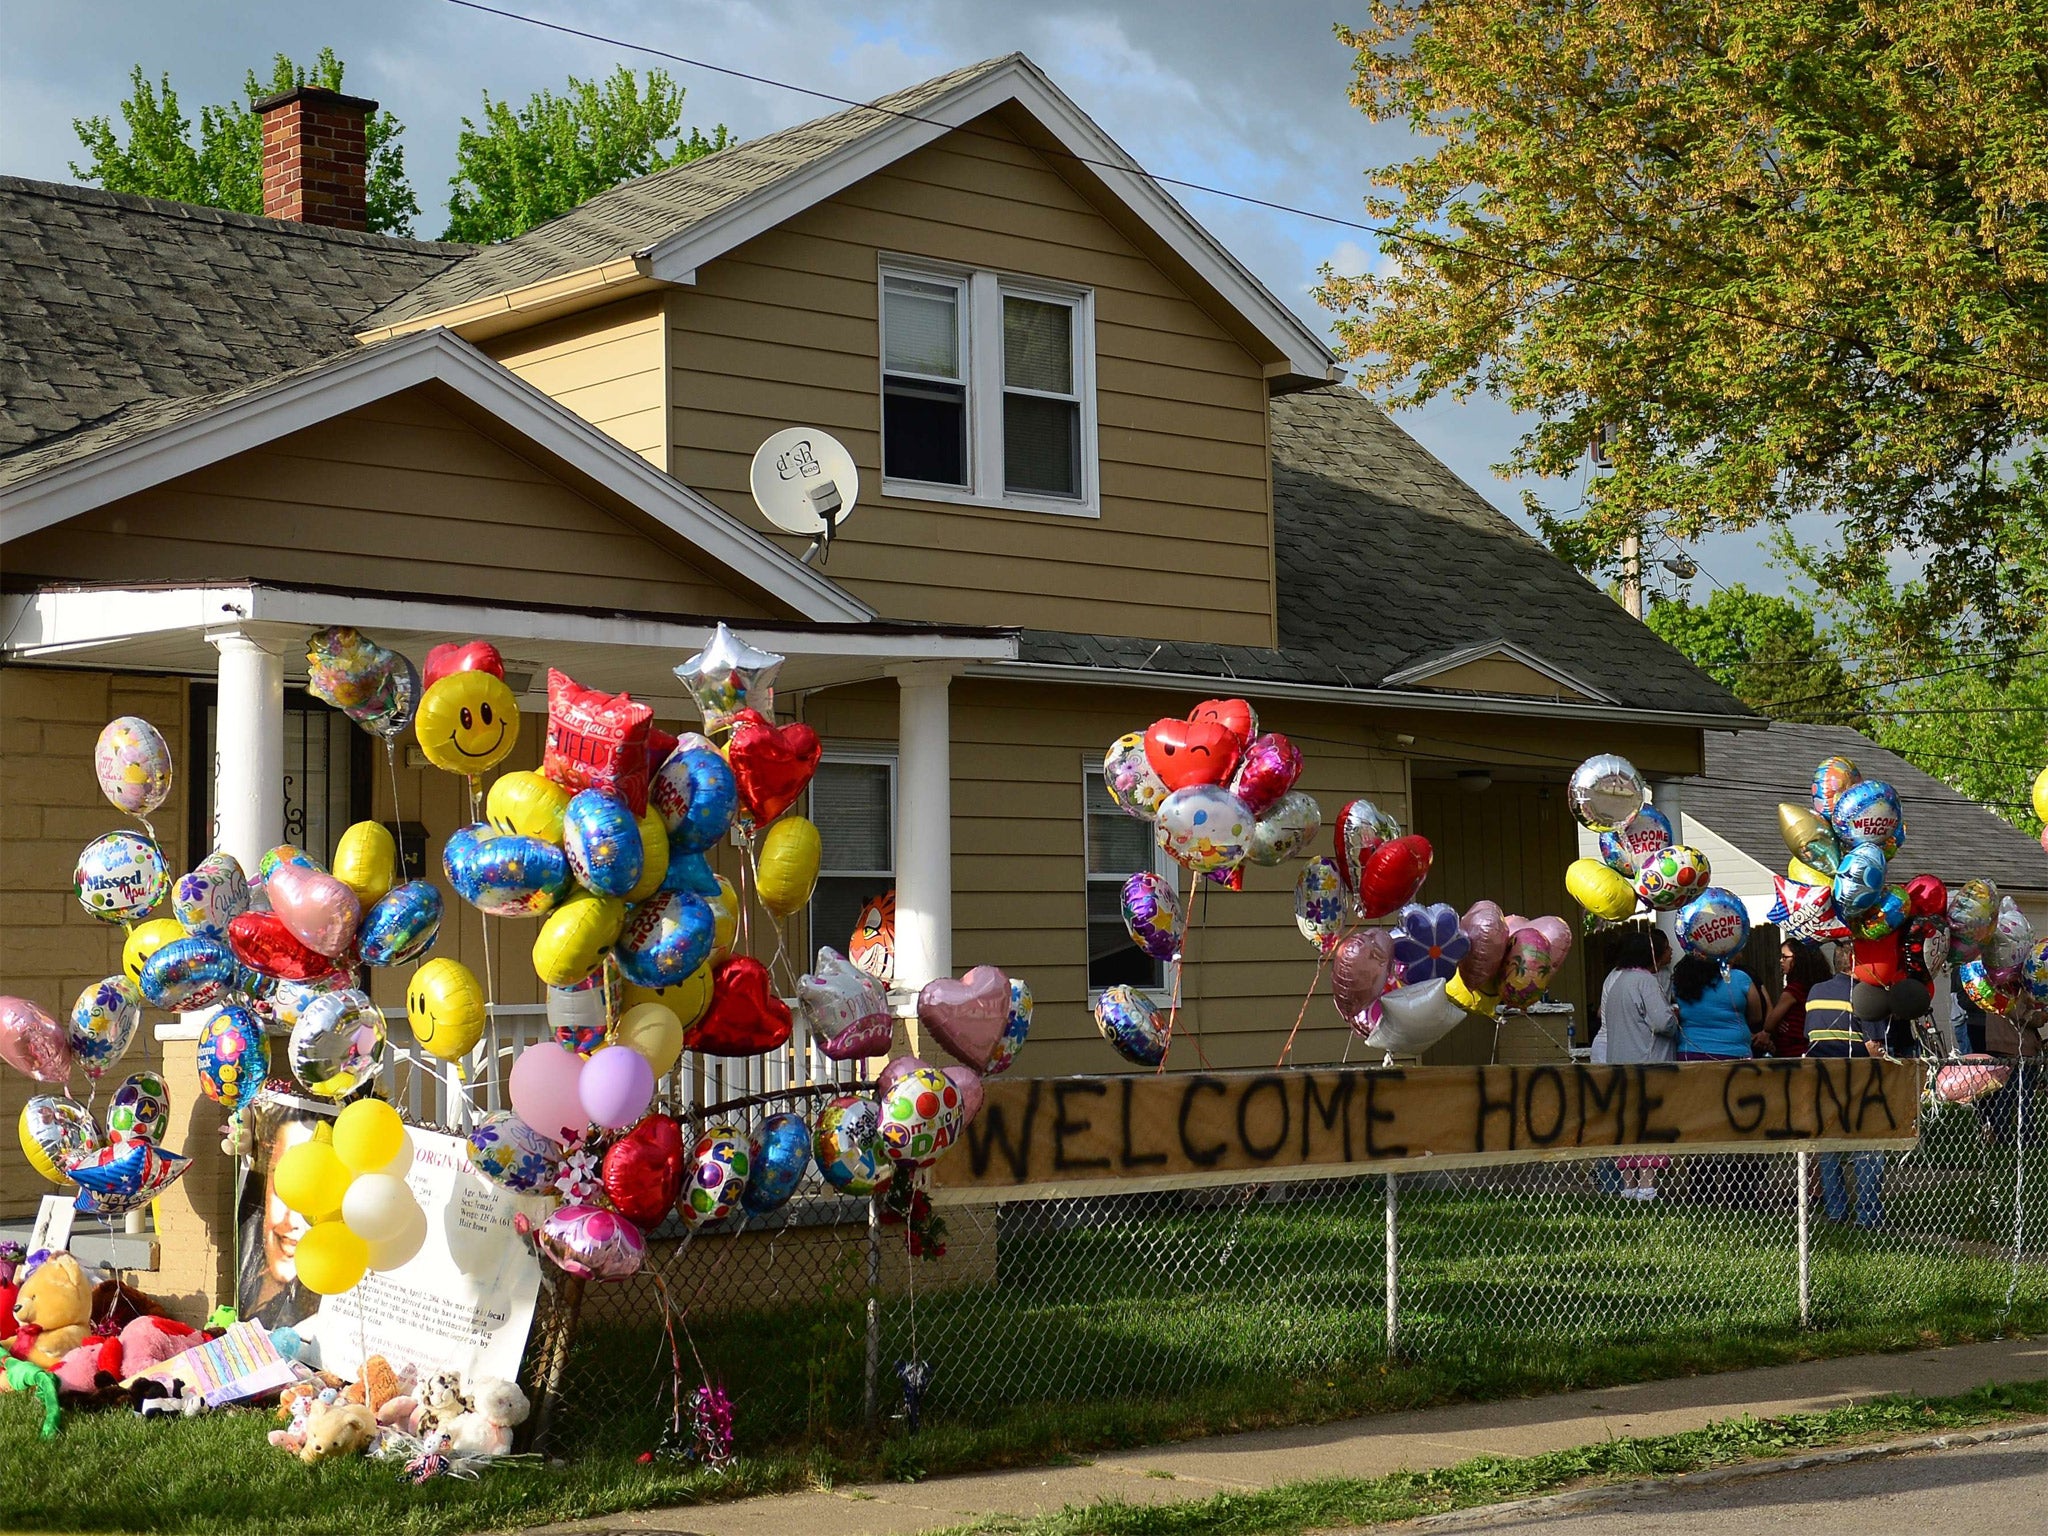 The family home of Gina DeJesus is decorated by well-wishers